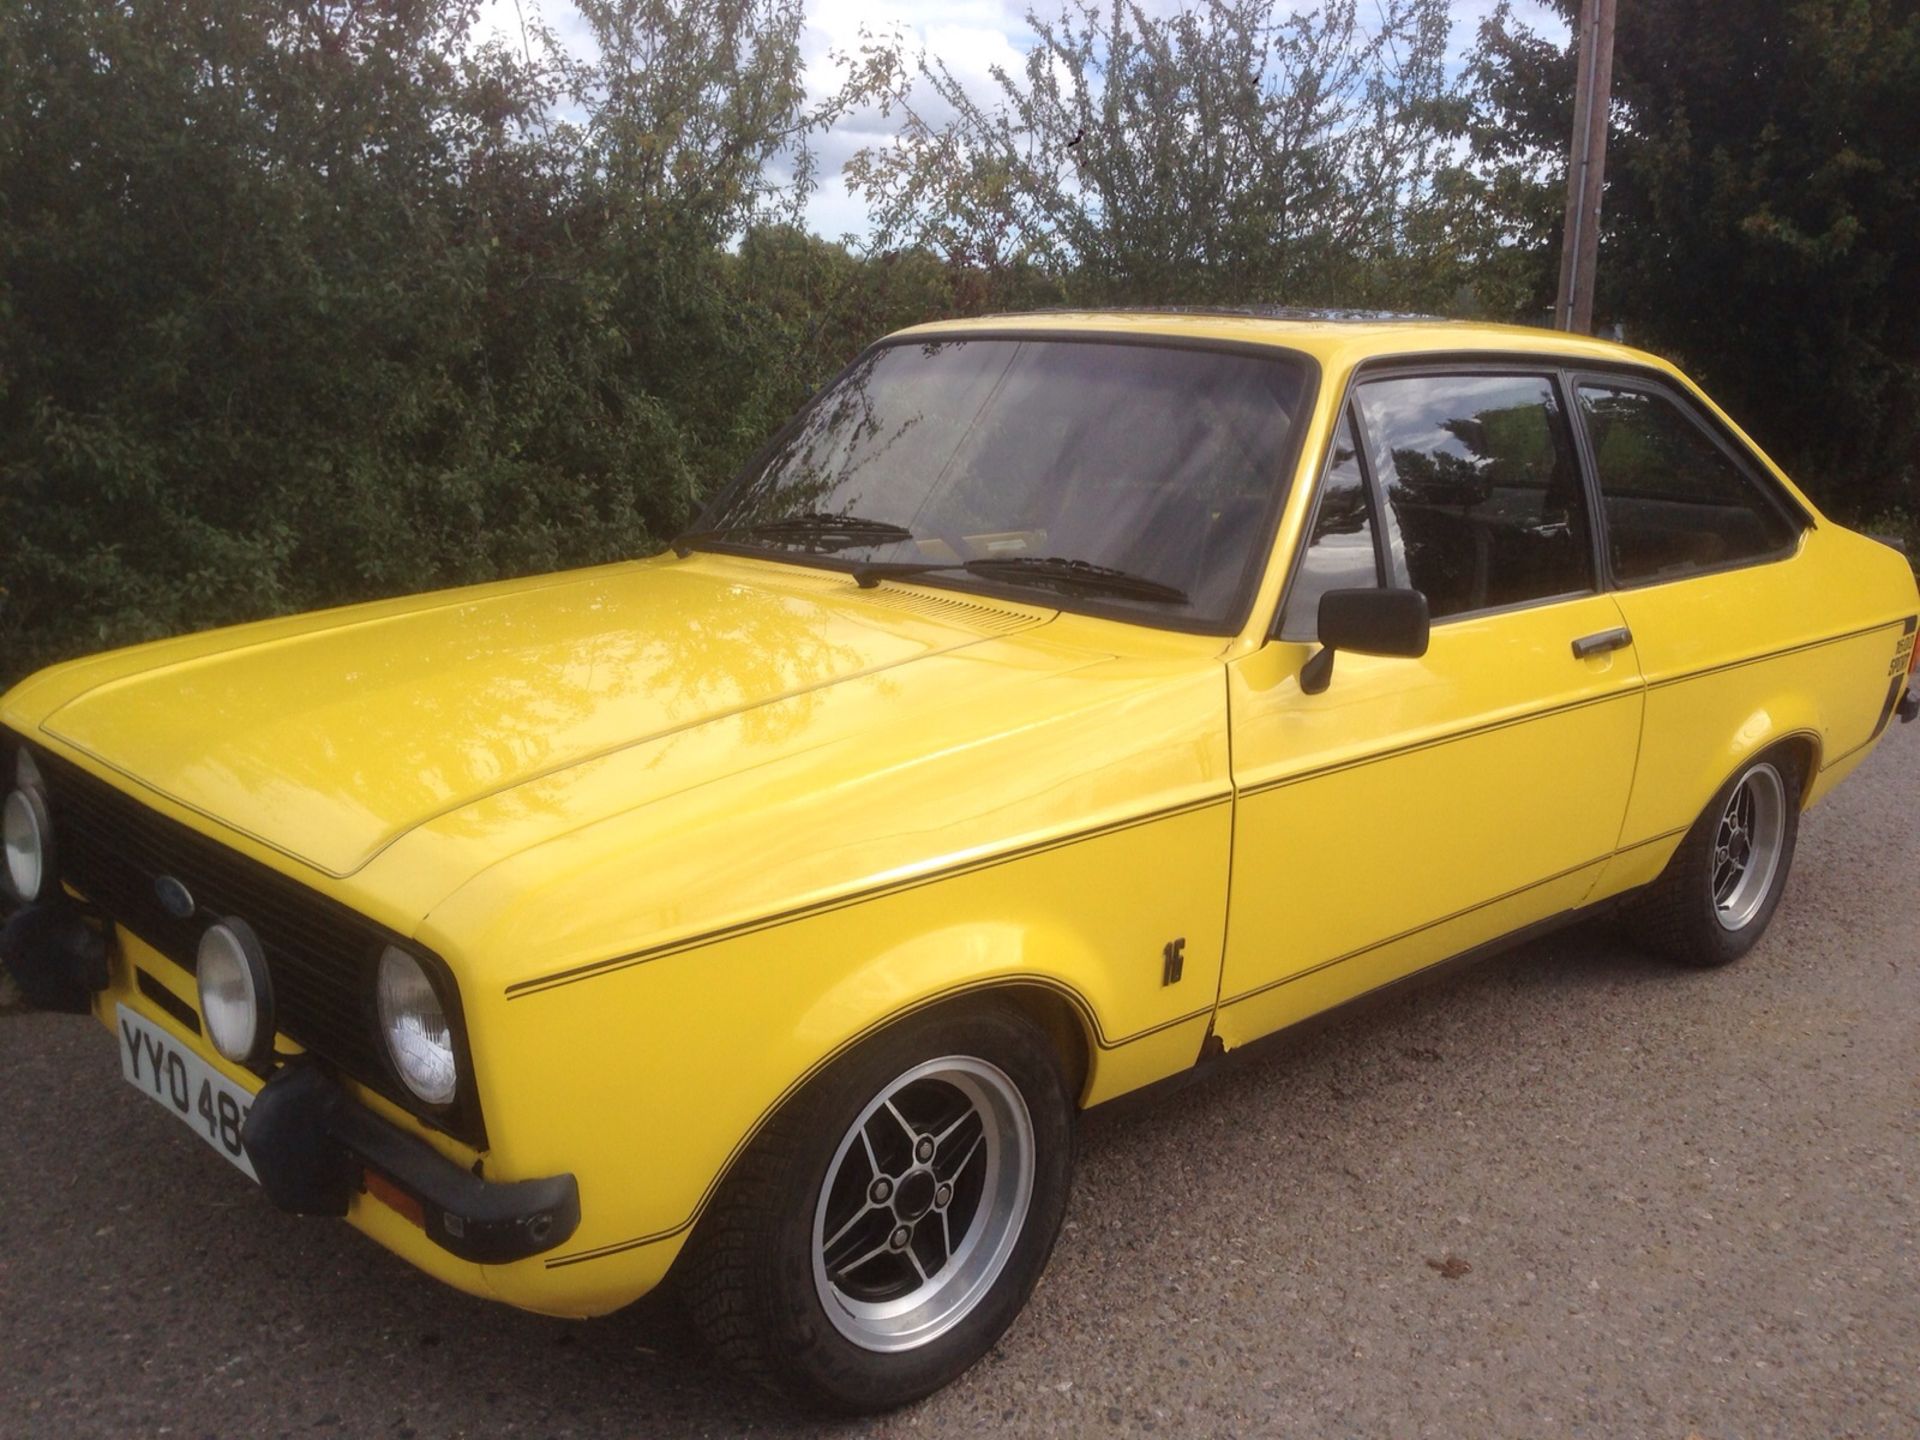 1979/T Ford Escort mk2 1600 Sport - in Signal yellow -  UK car  (545 miles) since rebuild